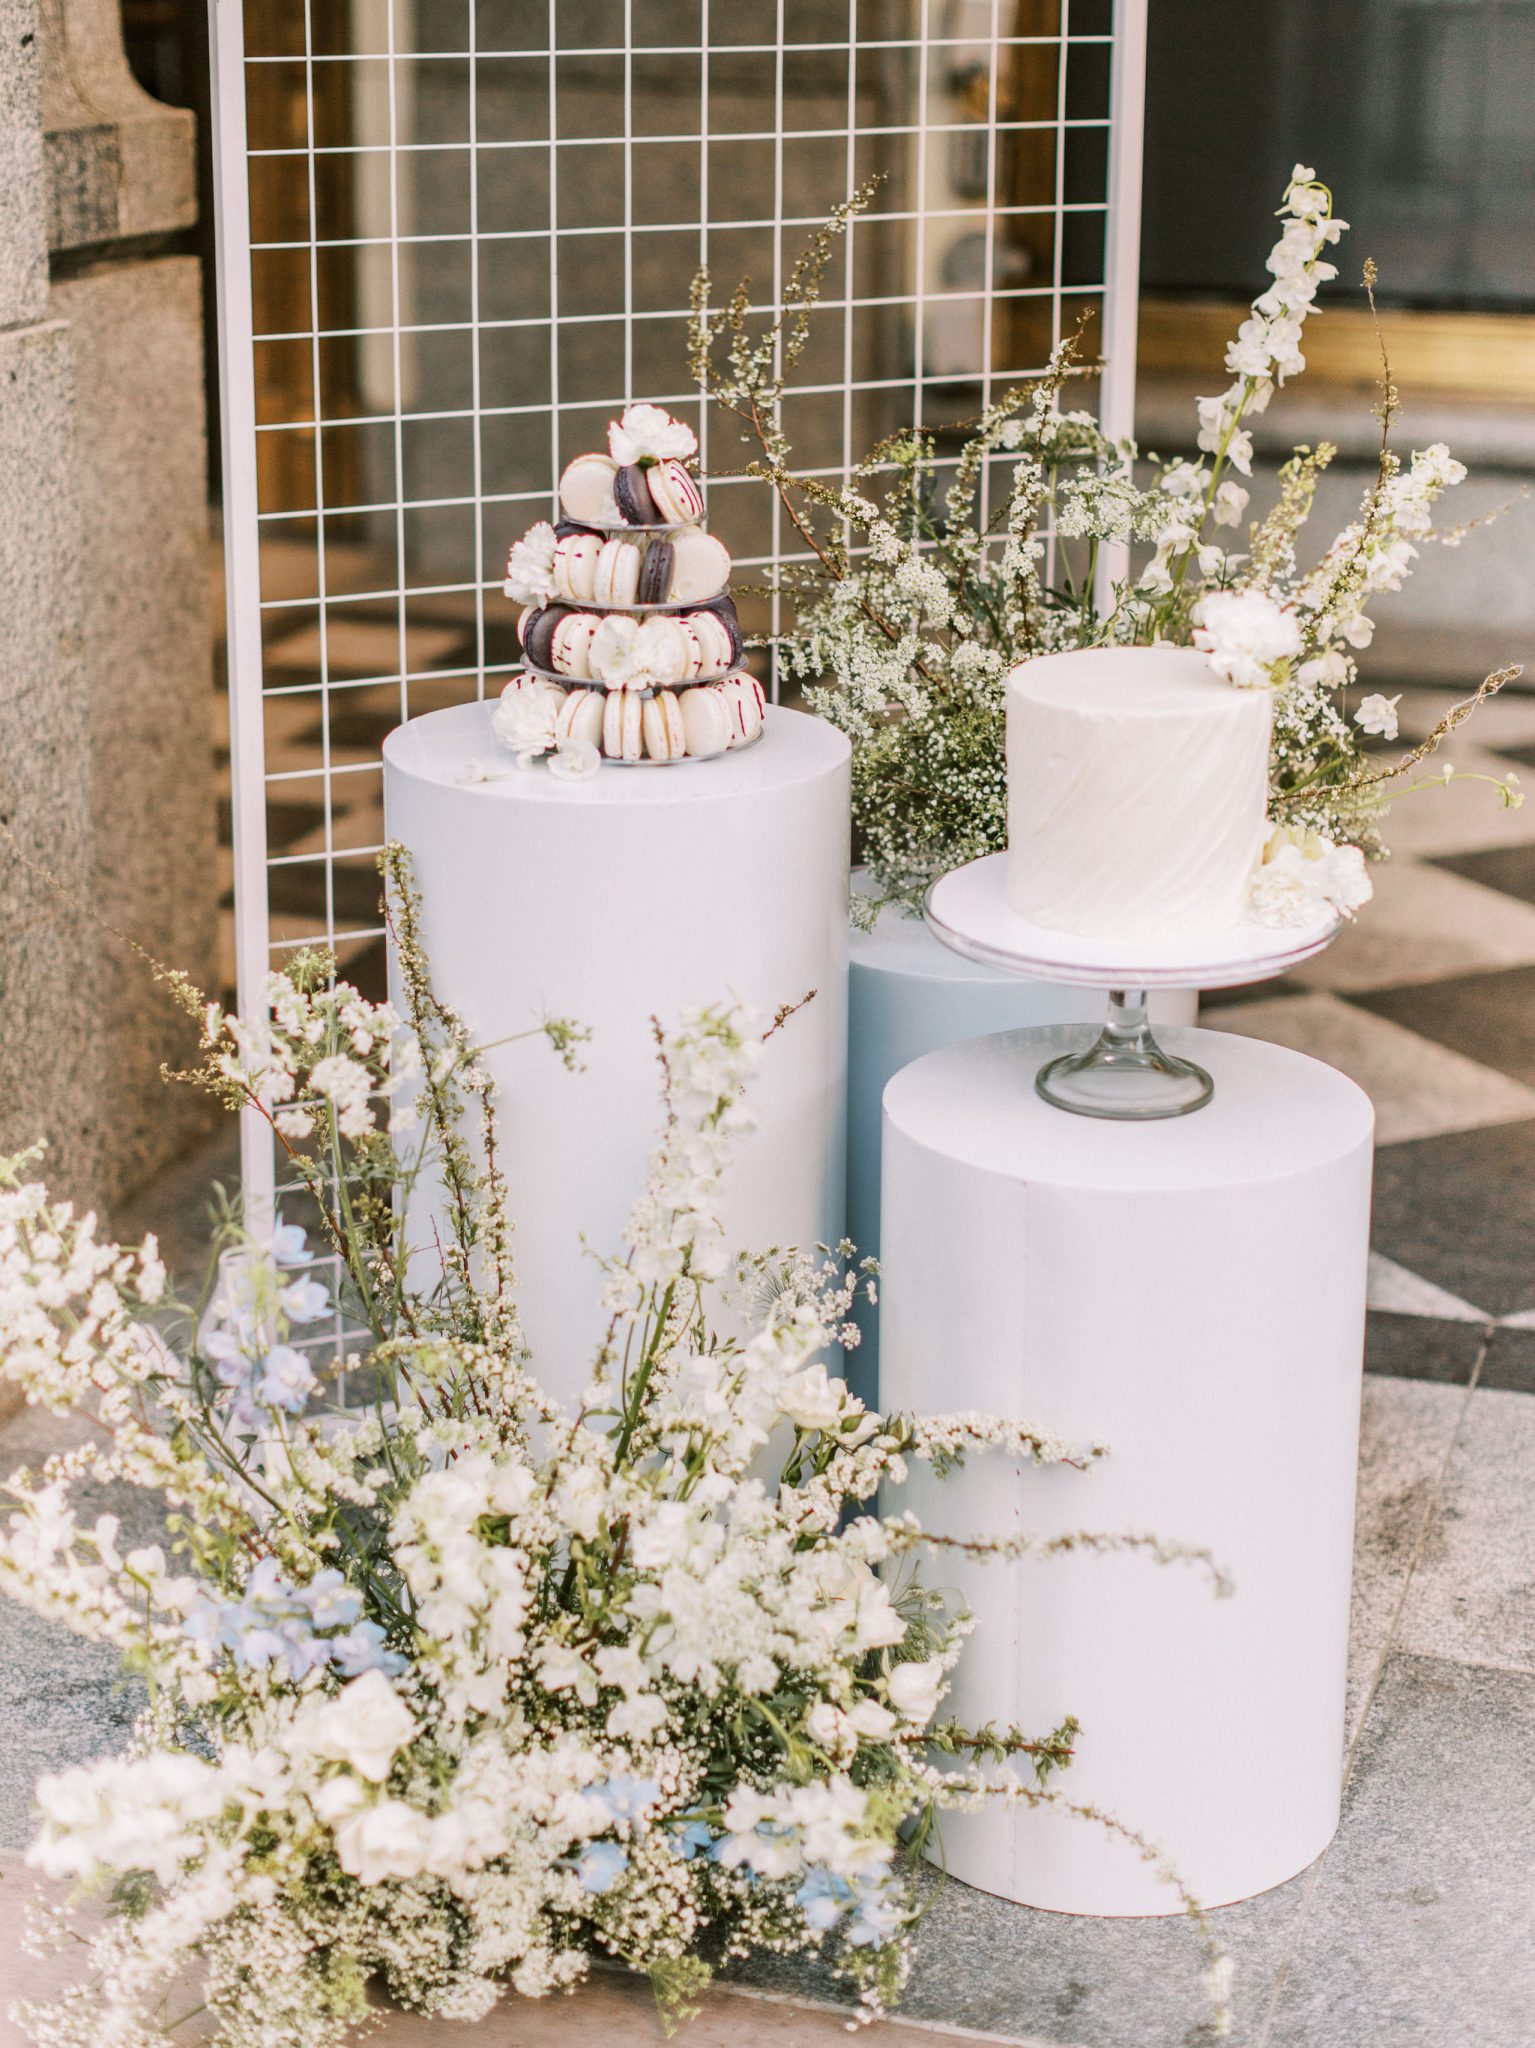 Monochromatic macarons and a white wedding cake as inspiration for a modern downtown elopement